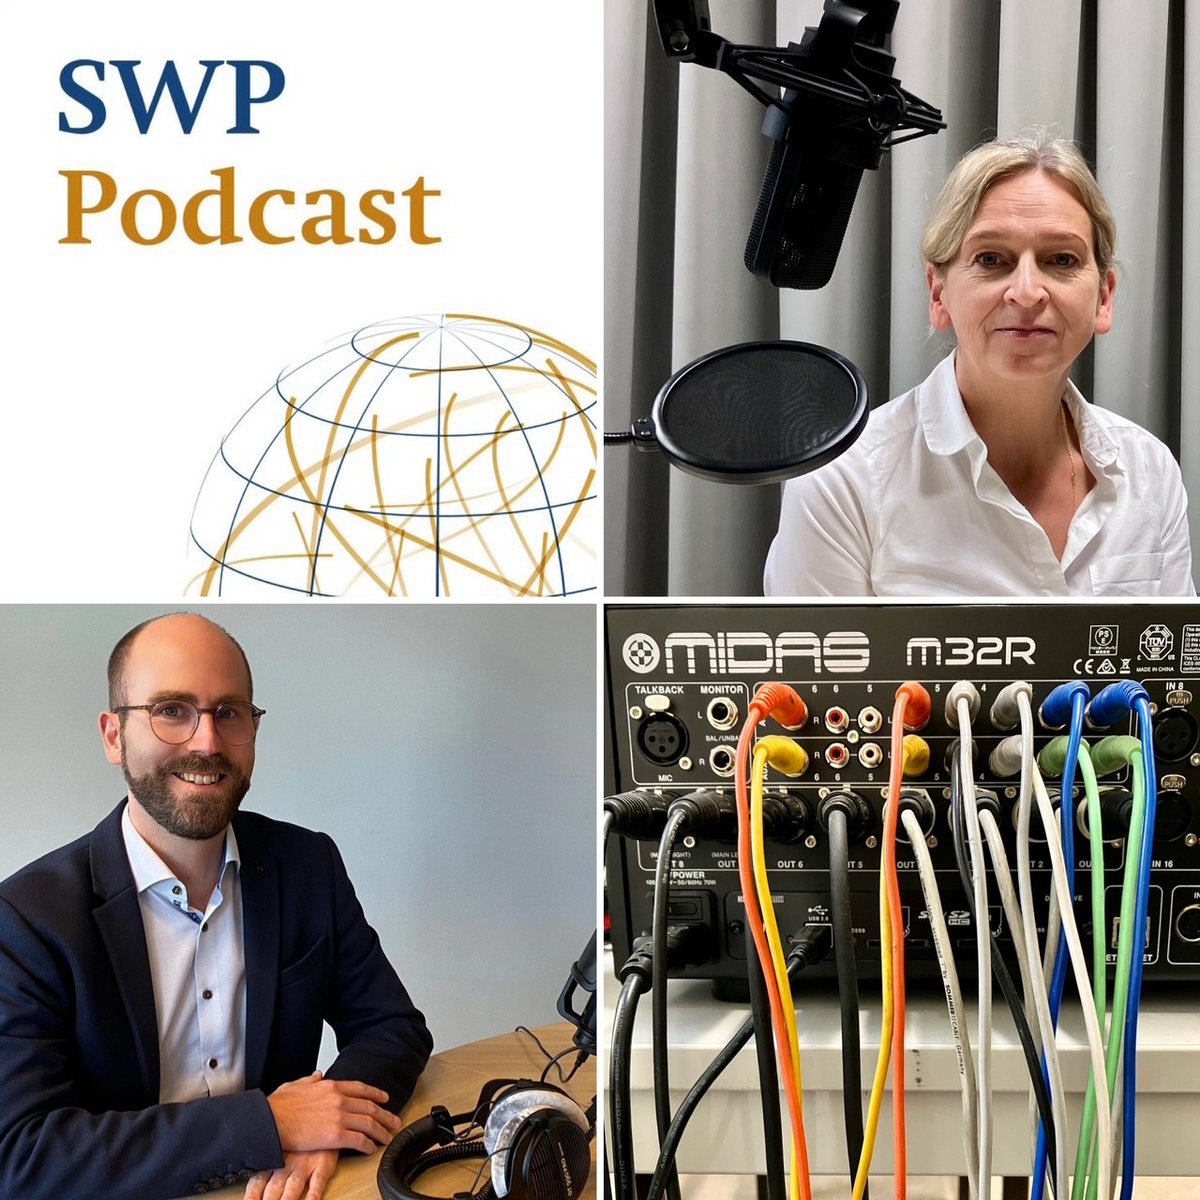 Political espionage, ransomware paralysing hospitals, surveillance software targeting civil society organisations: Cyber attacks are happening everwhere. @AnnegretBendiek & @jln_bund are talking about Europe’s cyber defense capabilities in our new podcast. swp-berlin.org/publikation/le…